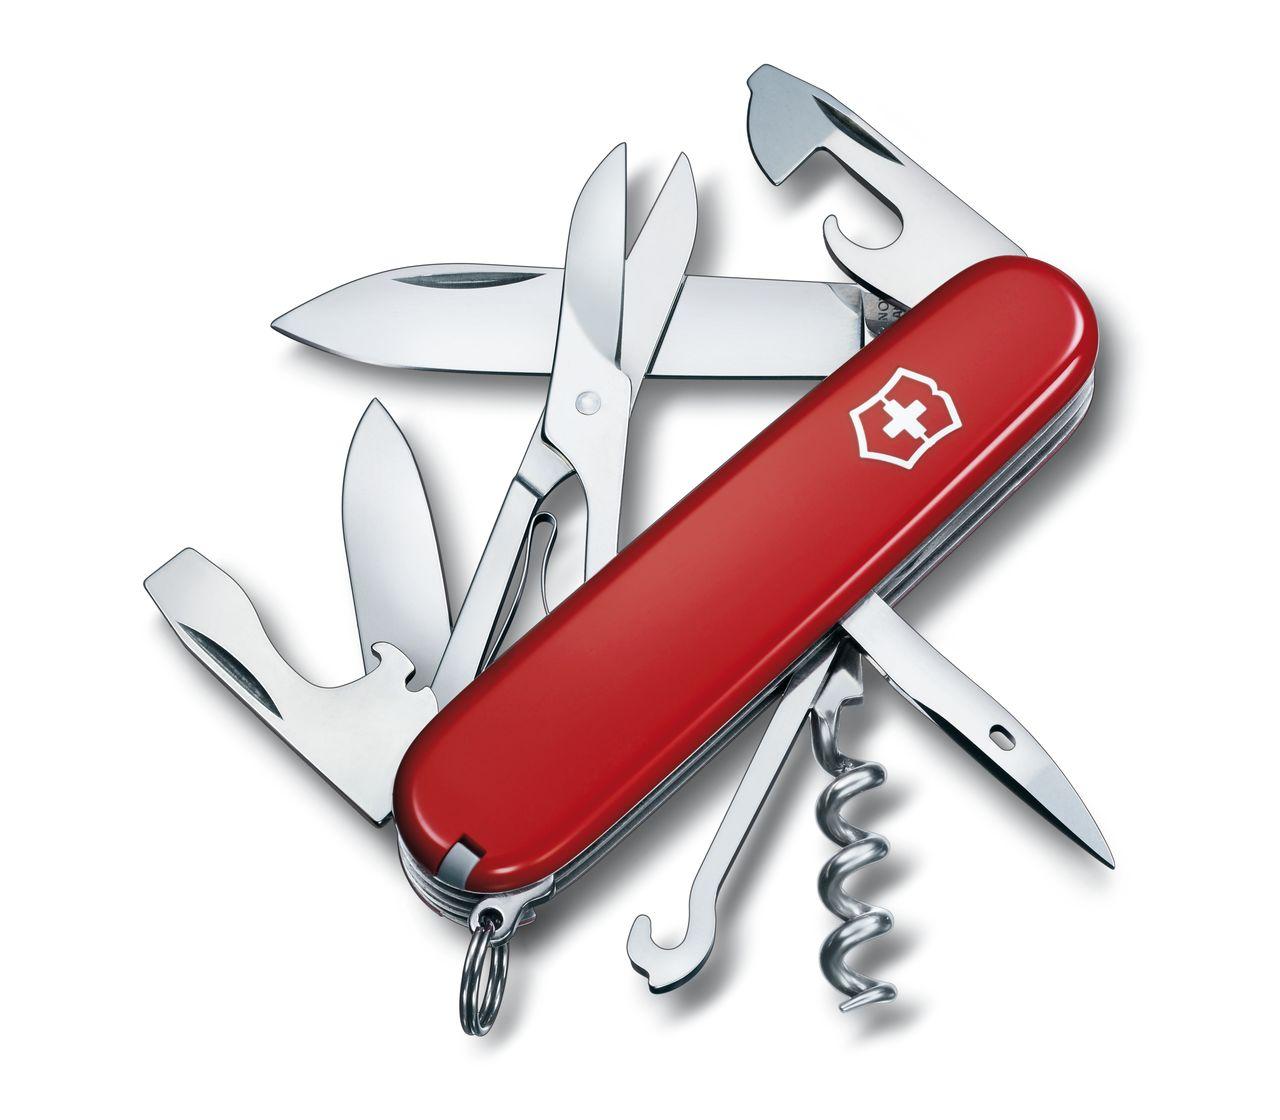 NEW Victorinox 2018 All You Wish For" Holiday Special Edition Swiss Army Climber 